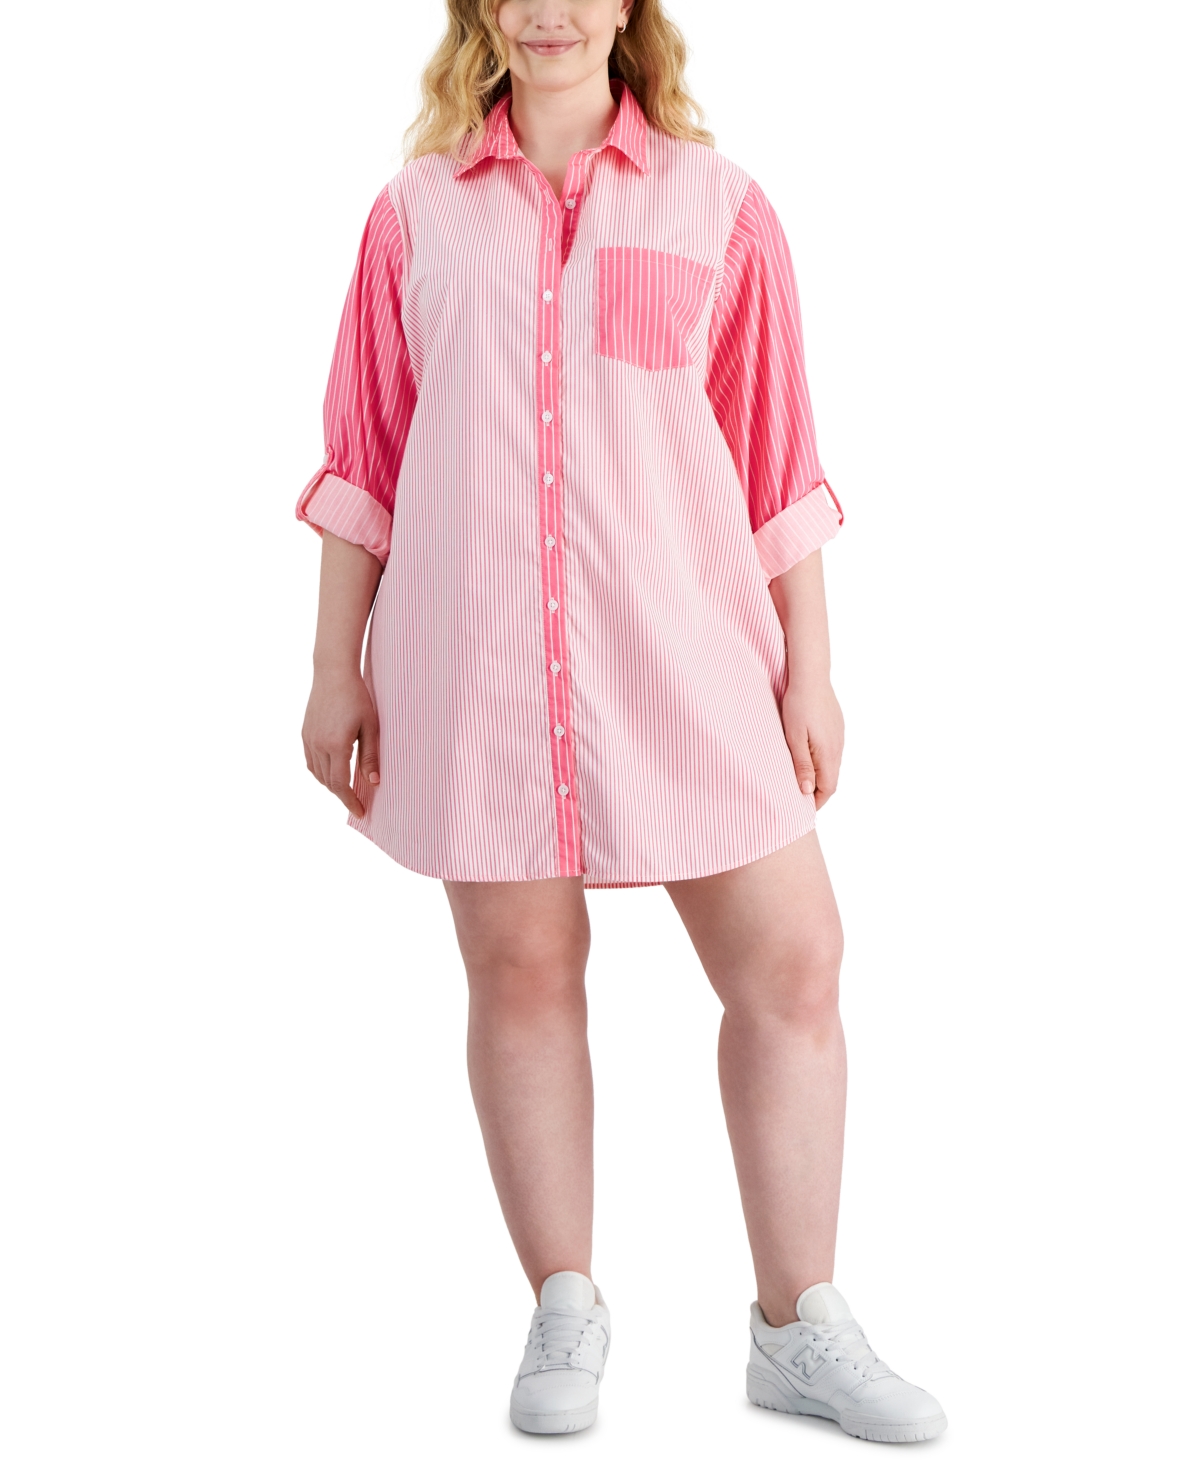 Full Circle Trends Trendy Plus Size Colorblocked Shirtdress In Azalea Pink